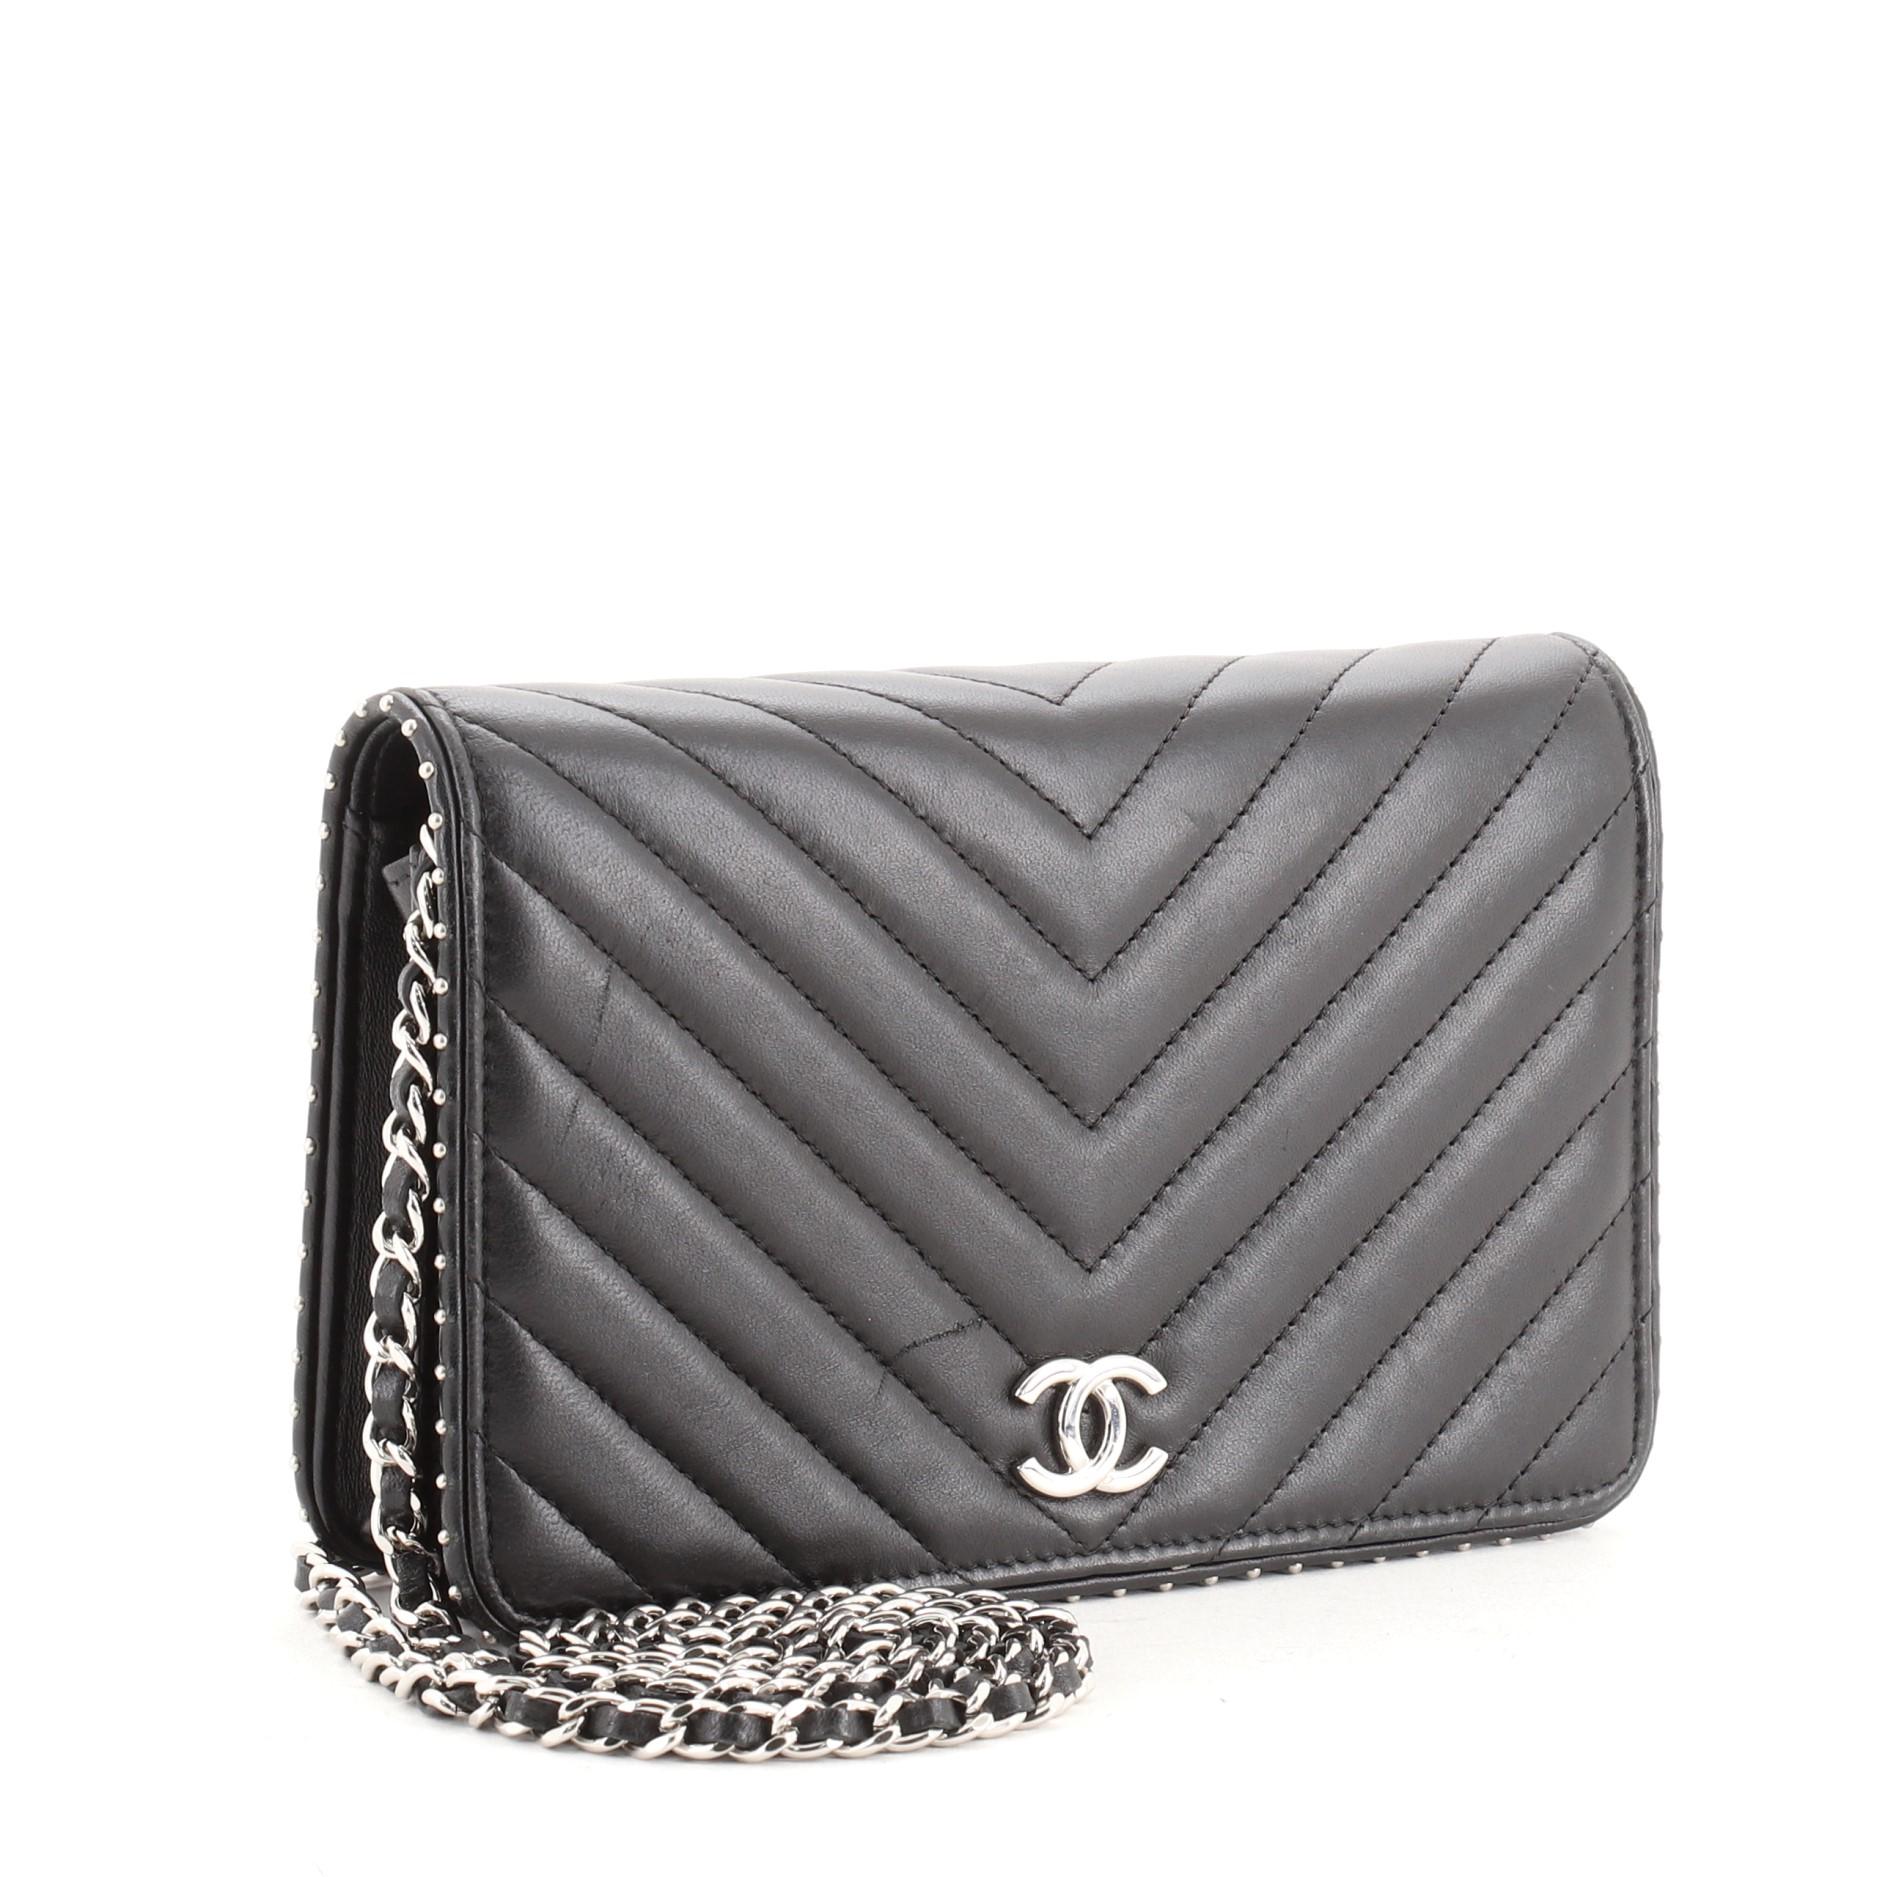 Black Chanel Wallet on Chain Chevron Lambskin with Studded Detail